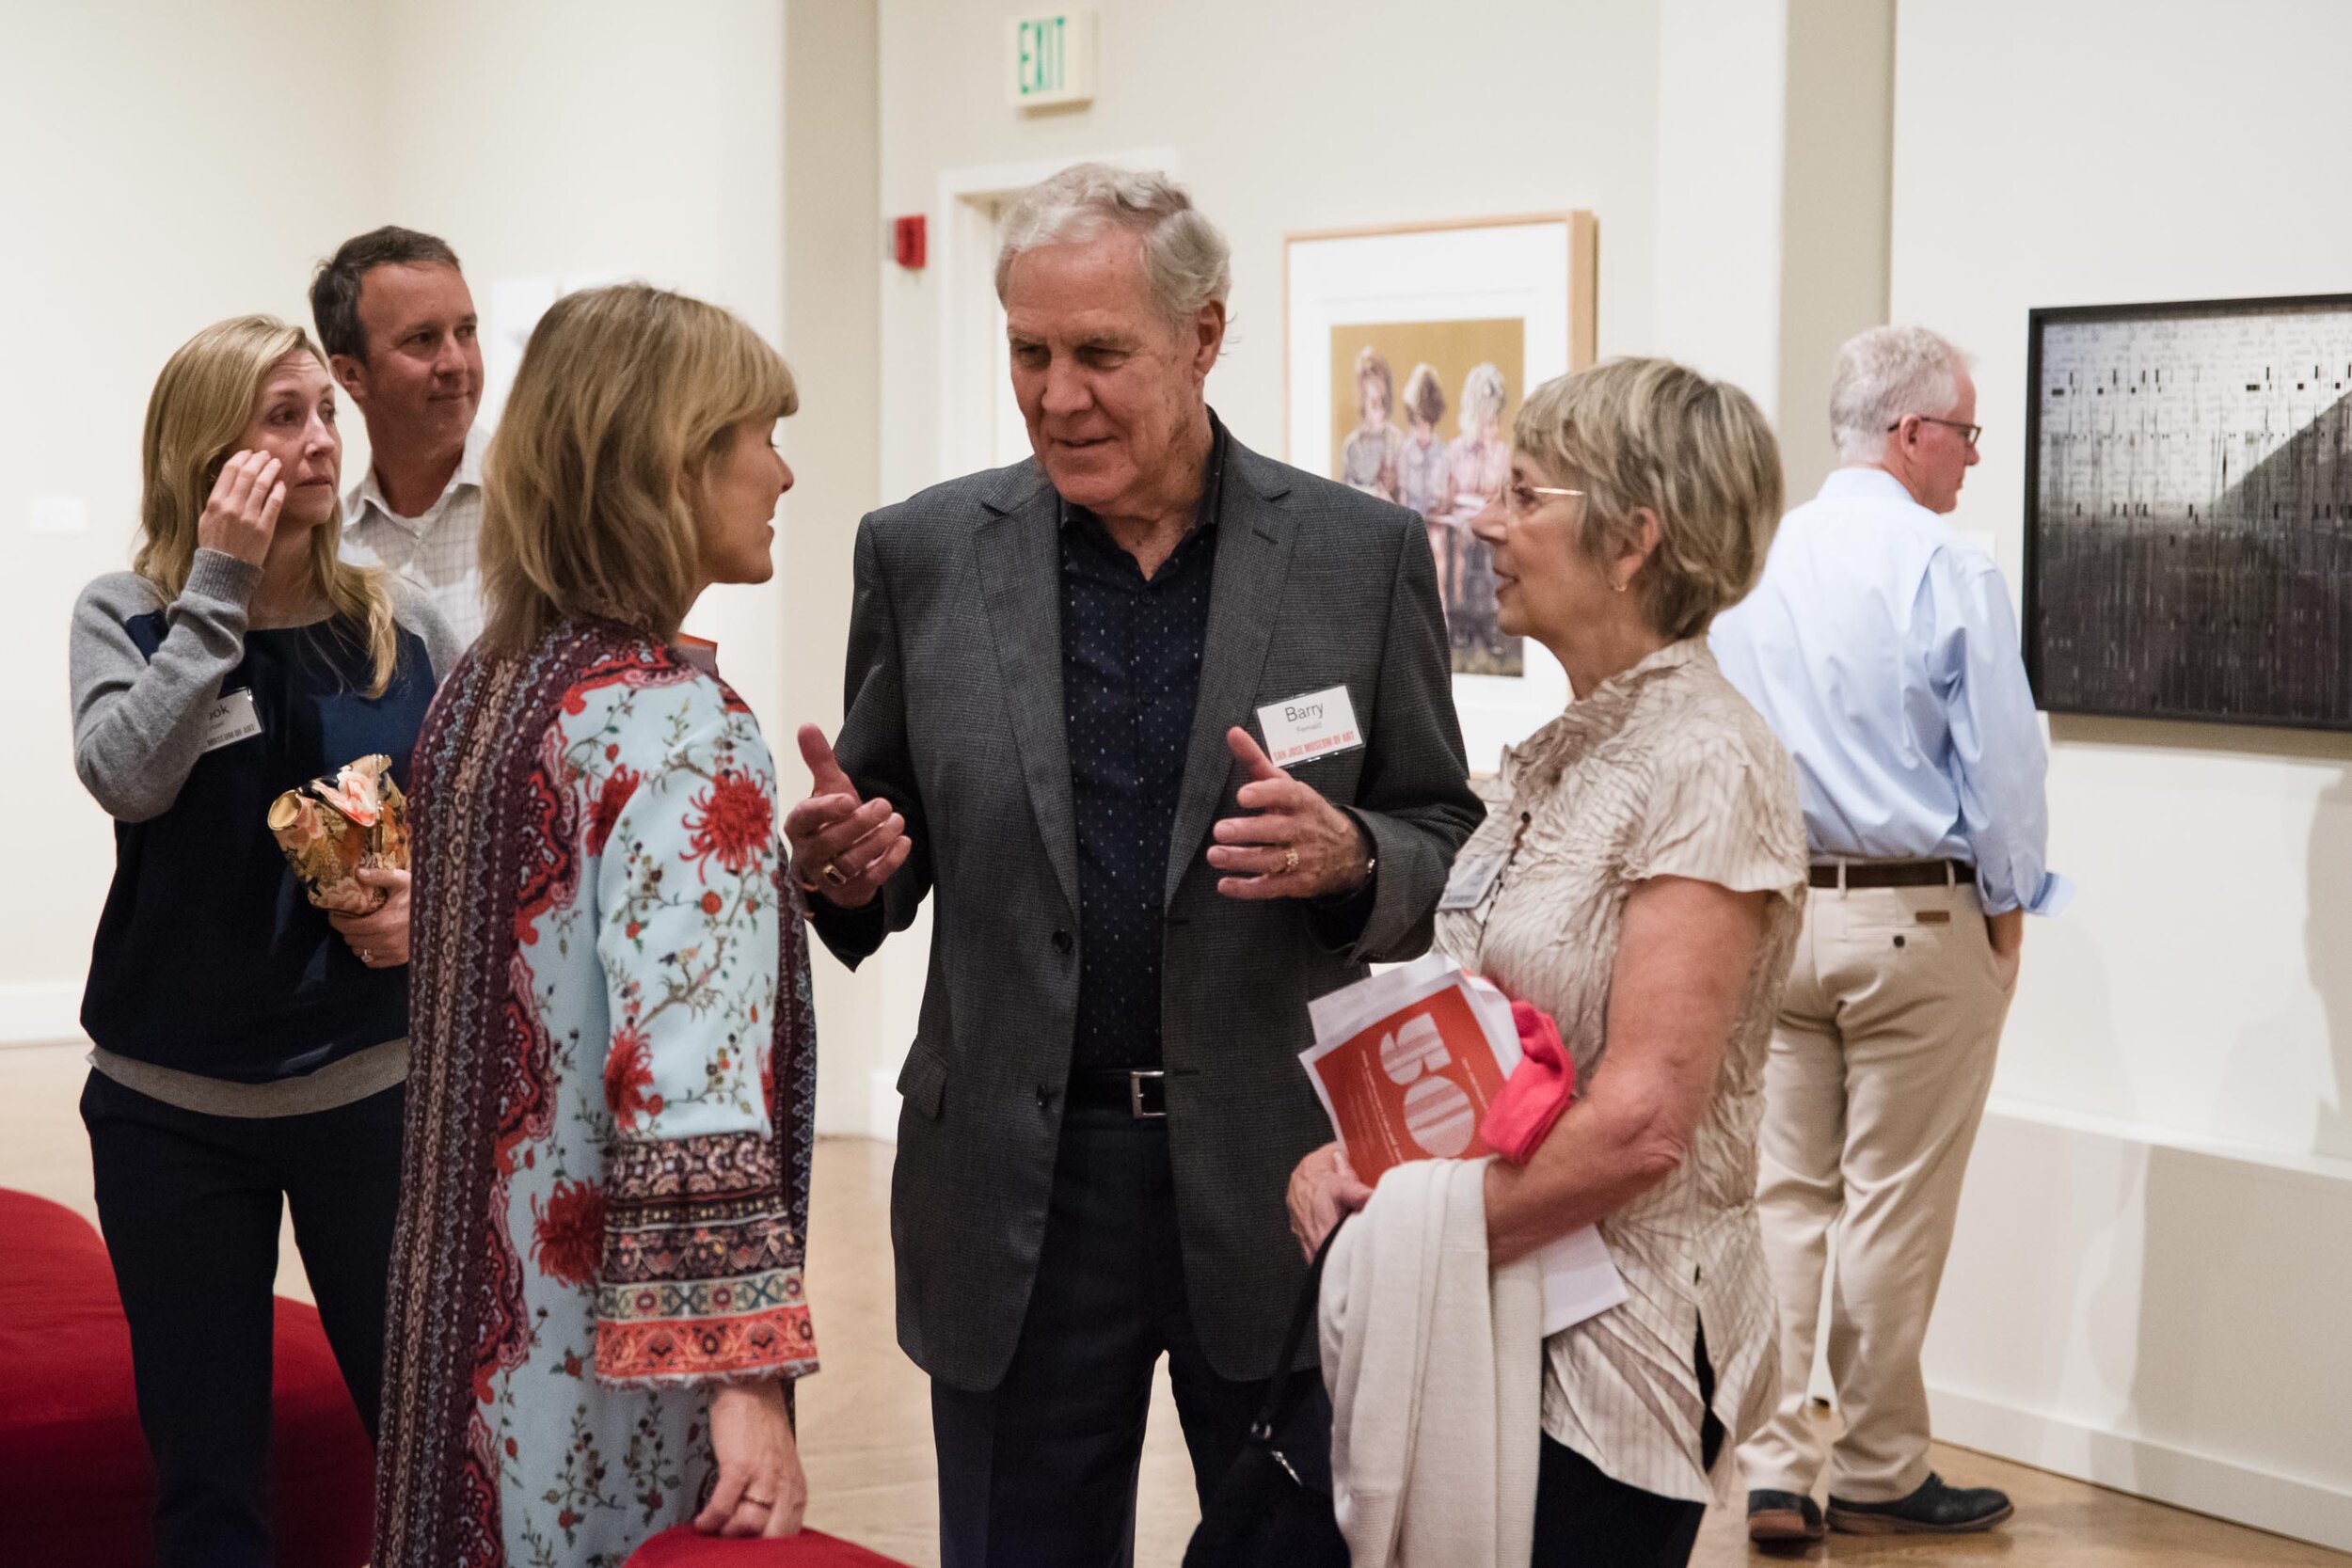 124_GalaAuctionPreview_9.16.19_photo_SharonKenney.jpg